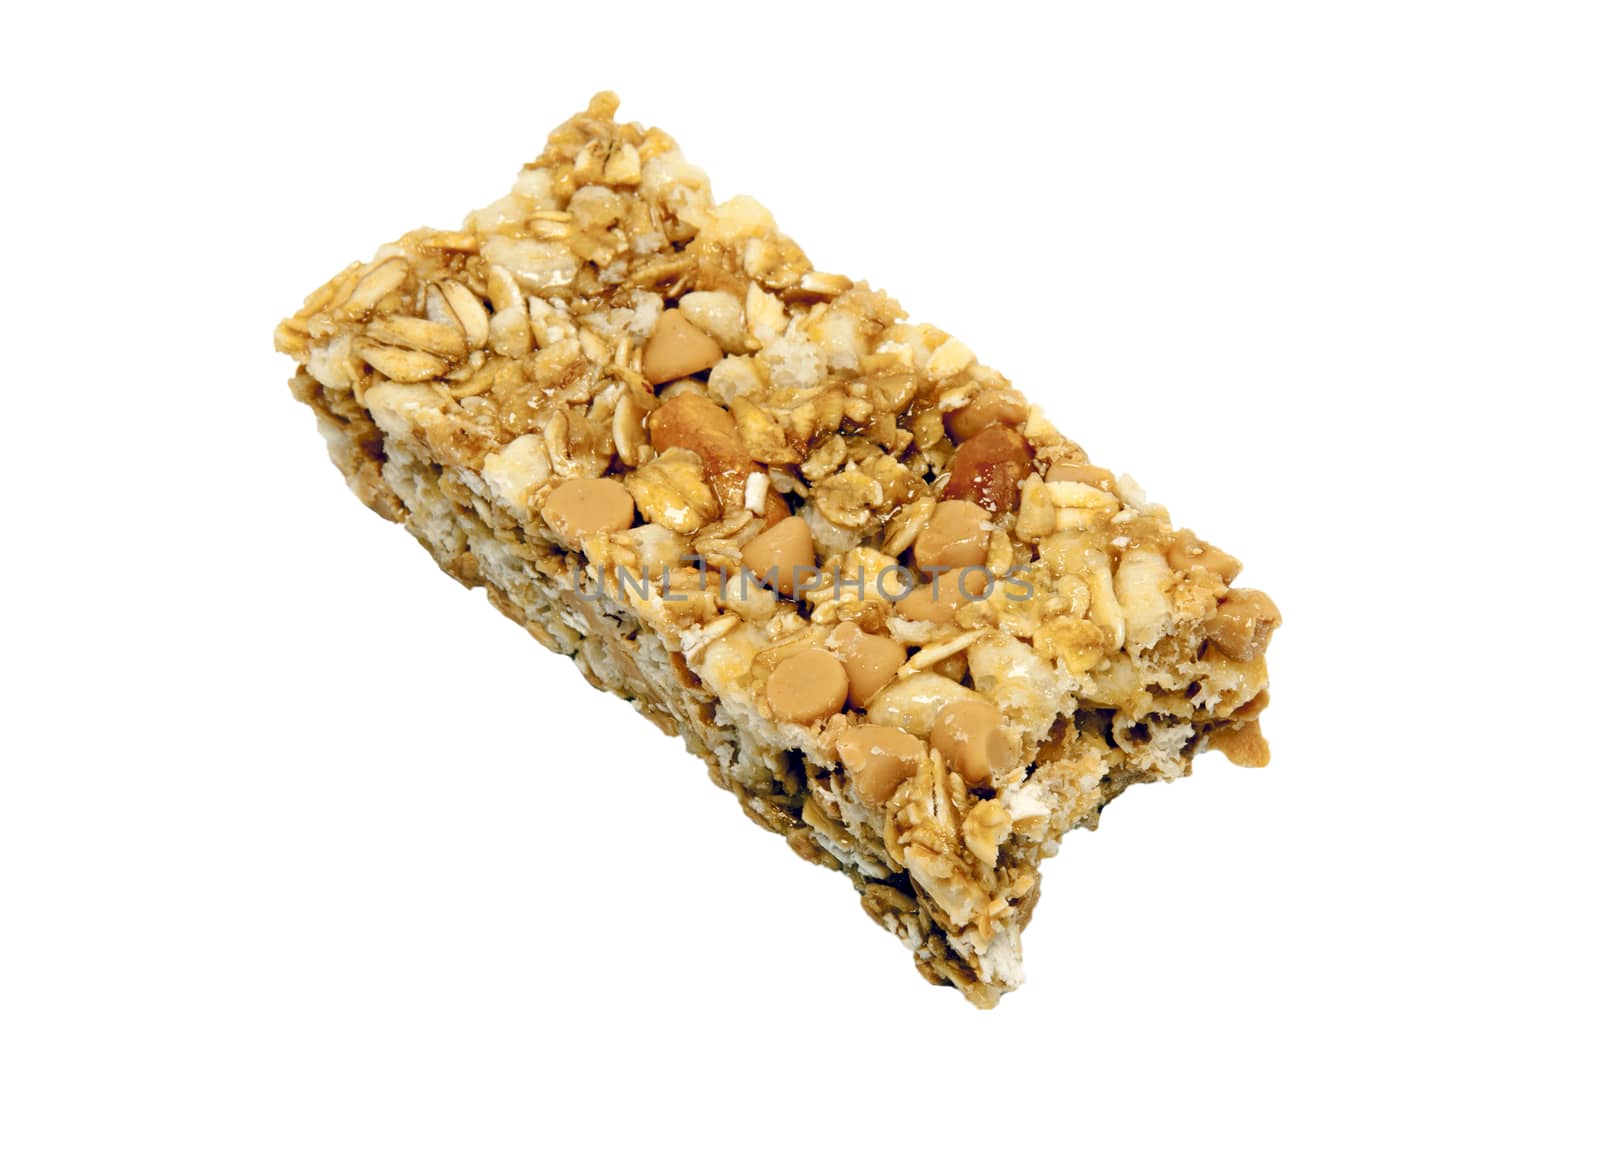 Close up shot of a delicious and chewy granola bar with big bite take out.  Isolated on white background.